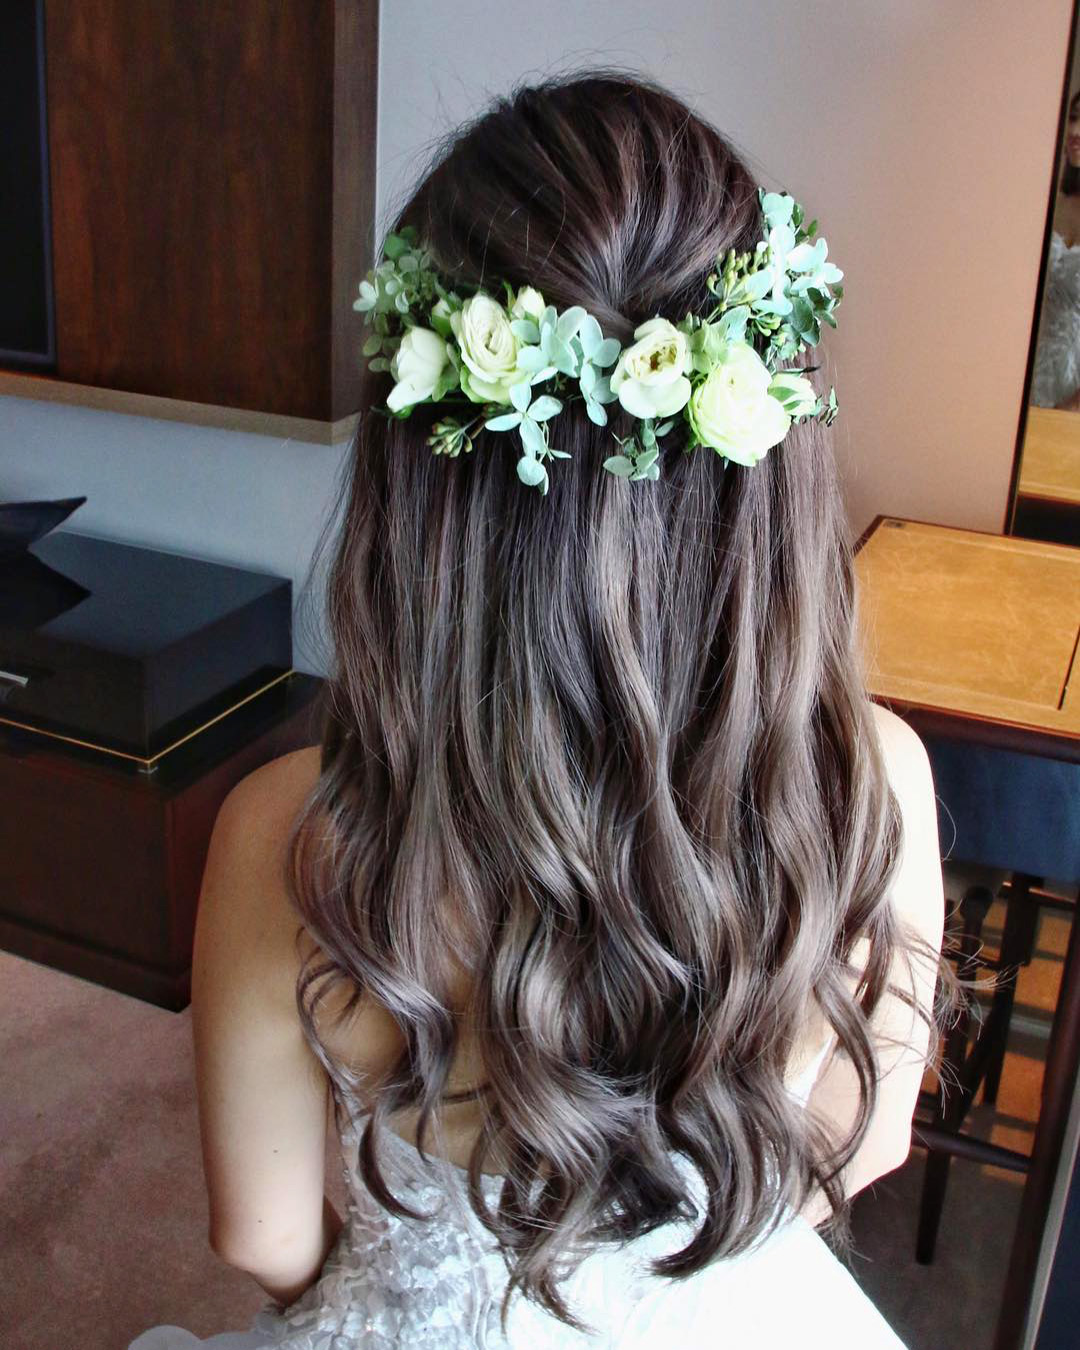 asian wedding hairstyles hair down wavy with flower crown christinechiamakeup